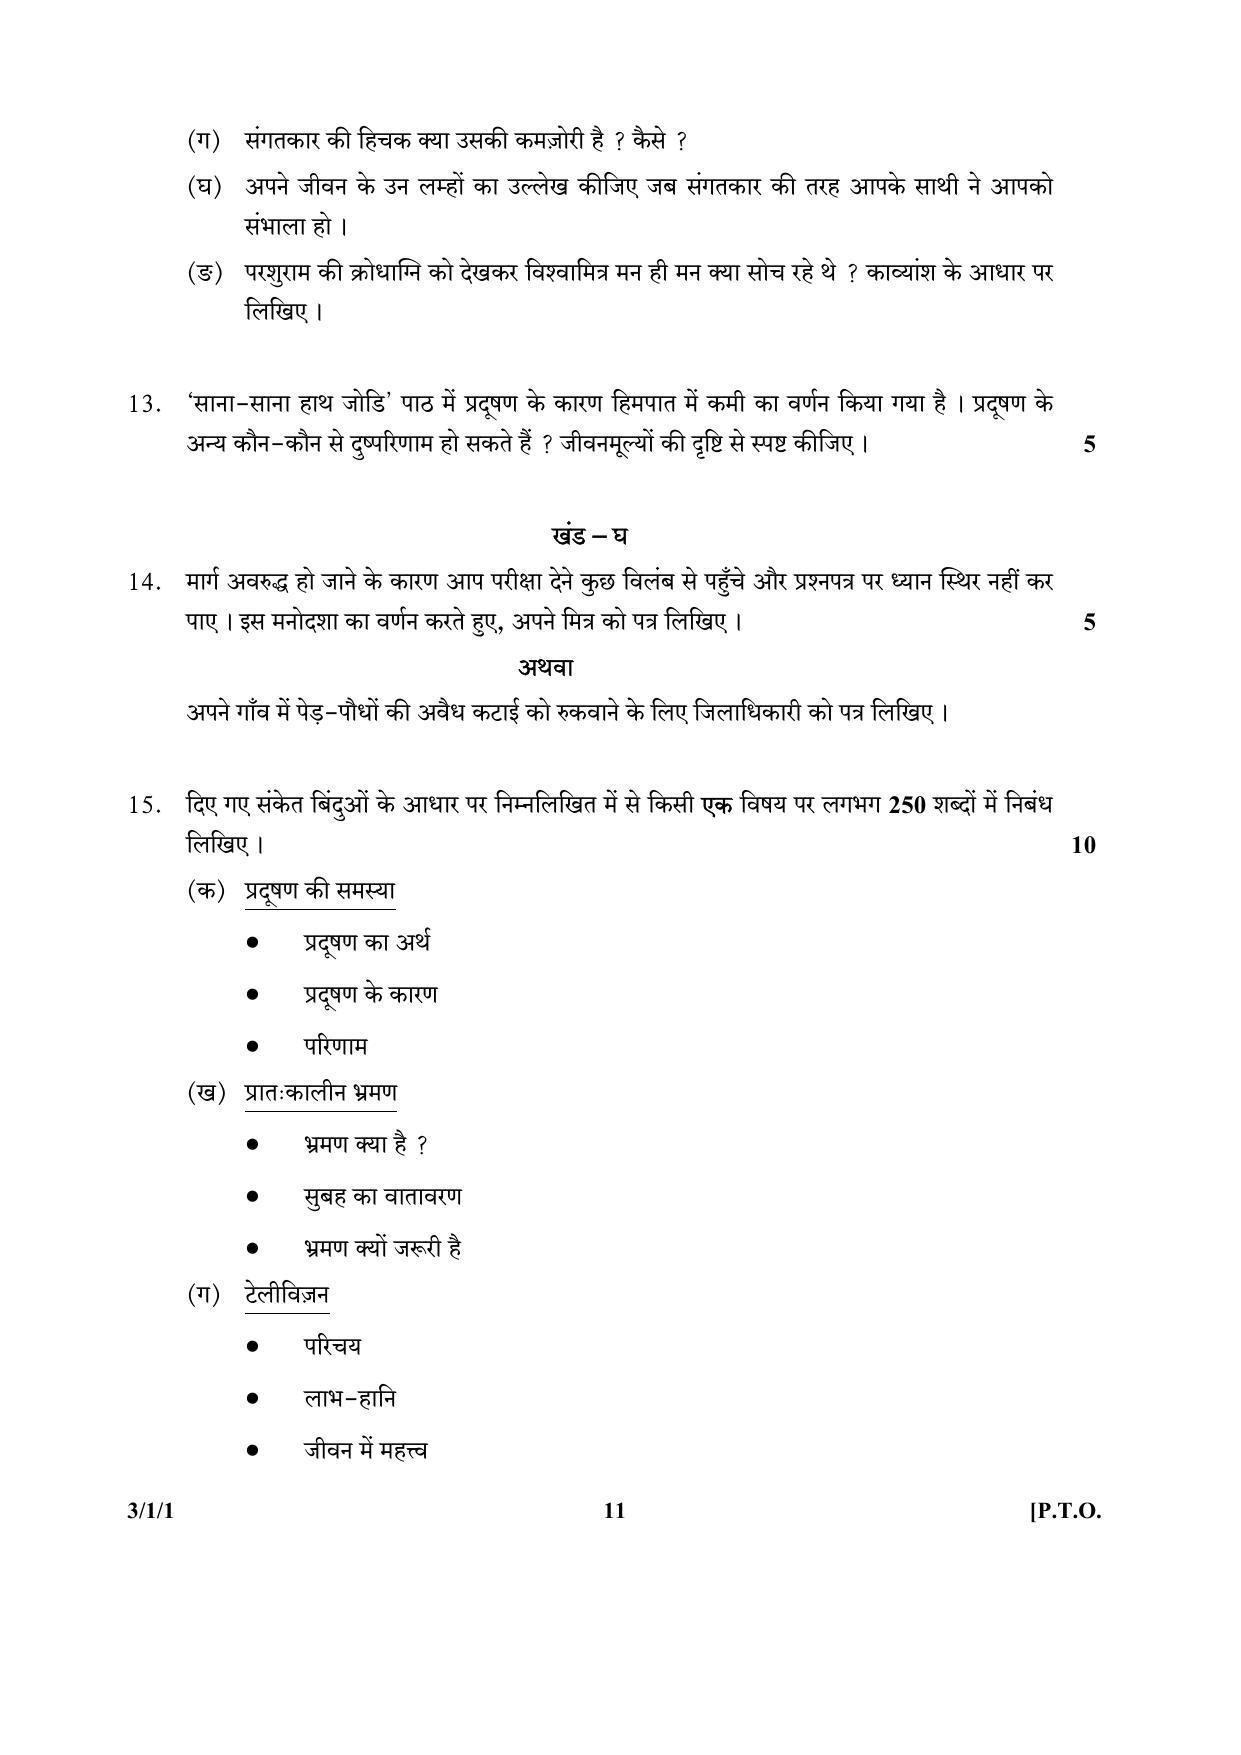 CBSE Class 10 3-1-1 (Hindi) 2017-comptt Question Paper - Page 11